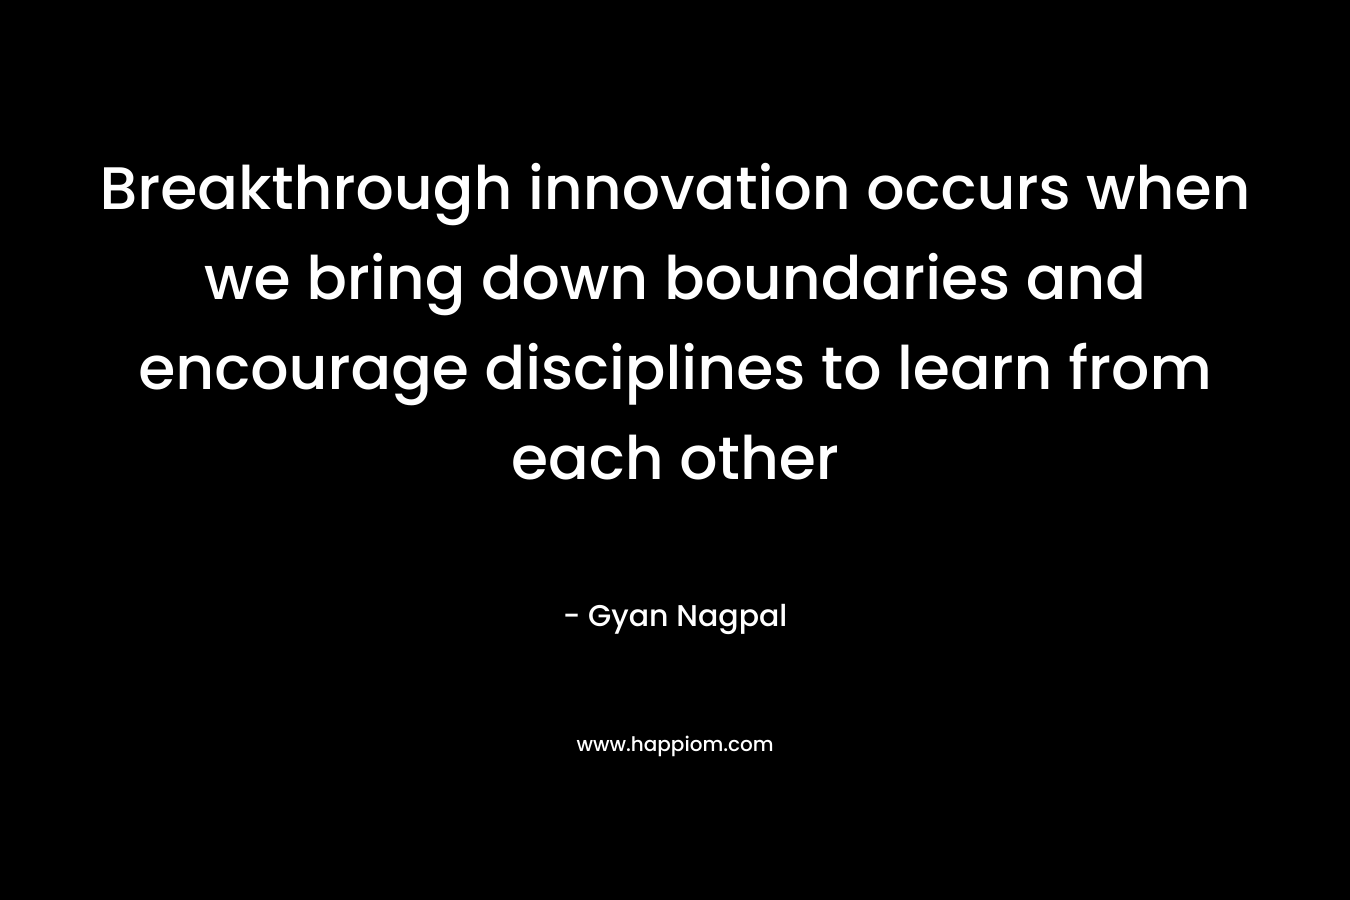 Breakthrough innovation occurs when we bring down boundaries and encourage disciplines to learn from each other